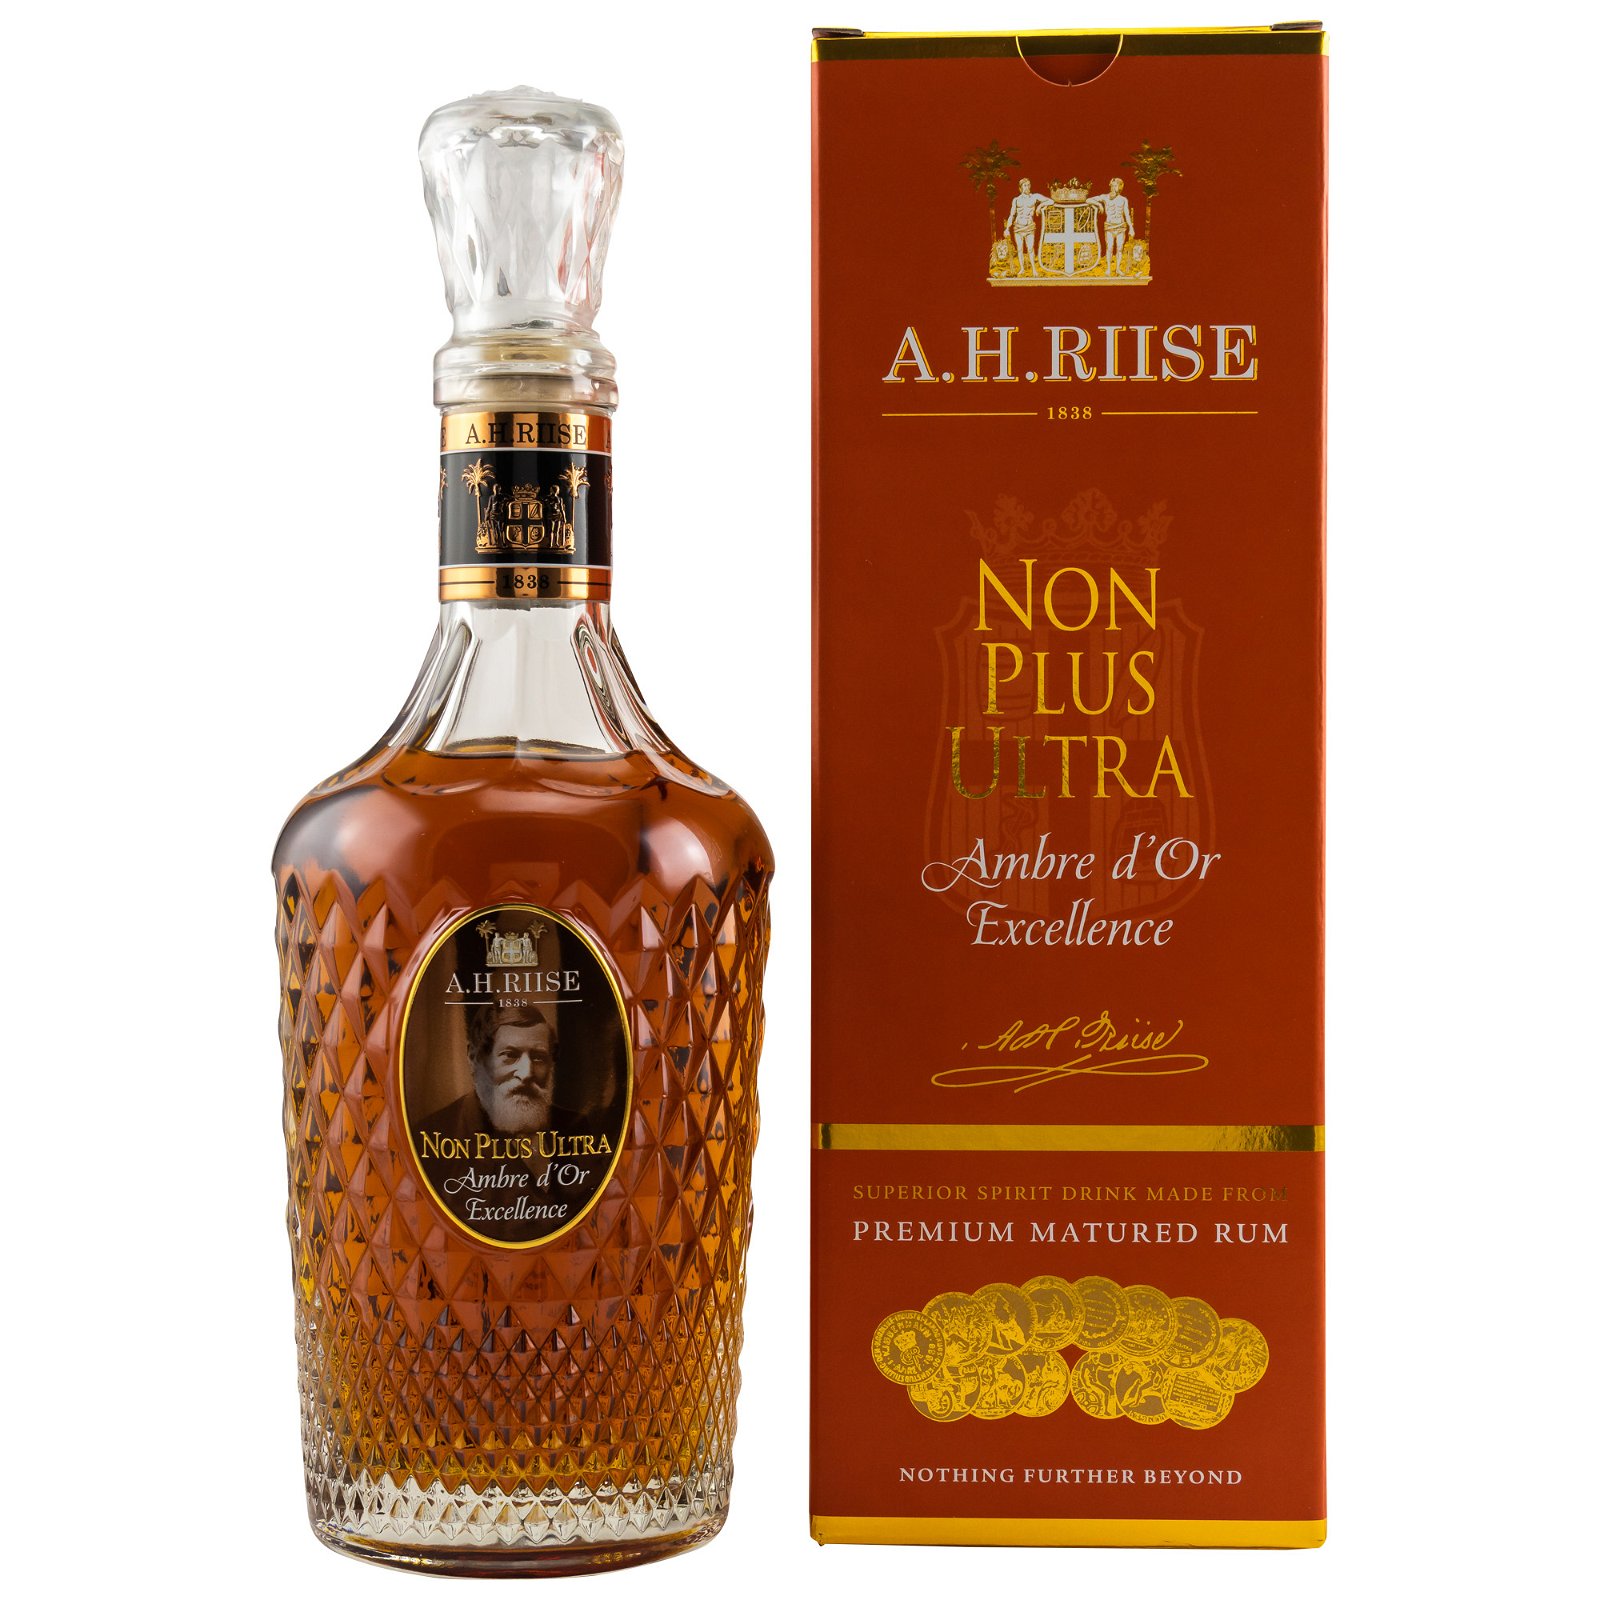 A.H. Riise Non Plus Ultra Ambre D'Or Excellence